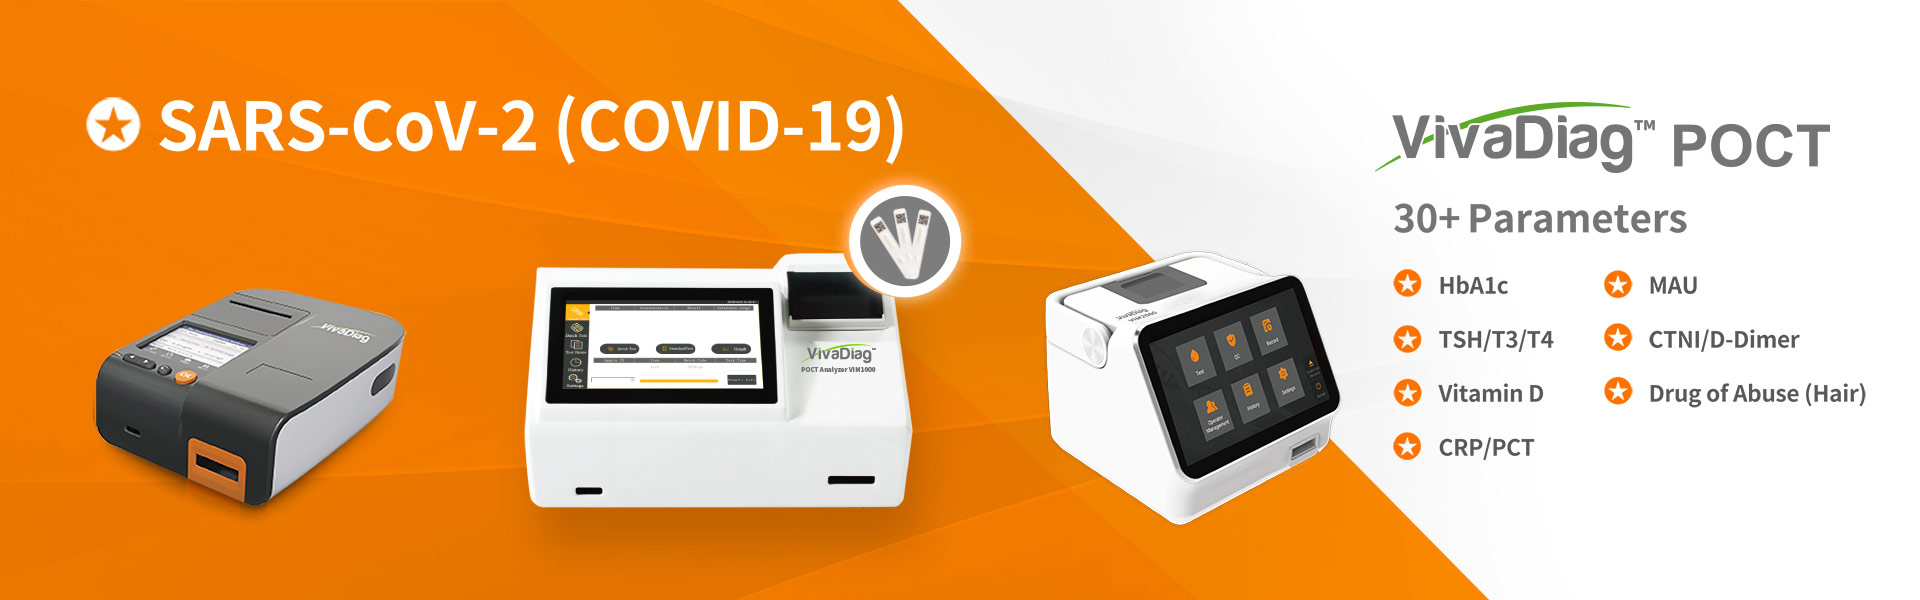 VivaDiag POCT Analyzer VIM001 uses the cutting-edge and innovative Fluorescence Immunochromatography technology, to generate test results in just few minutes.